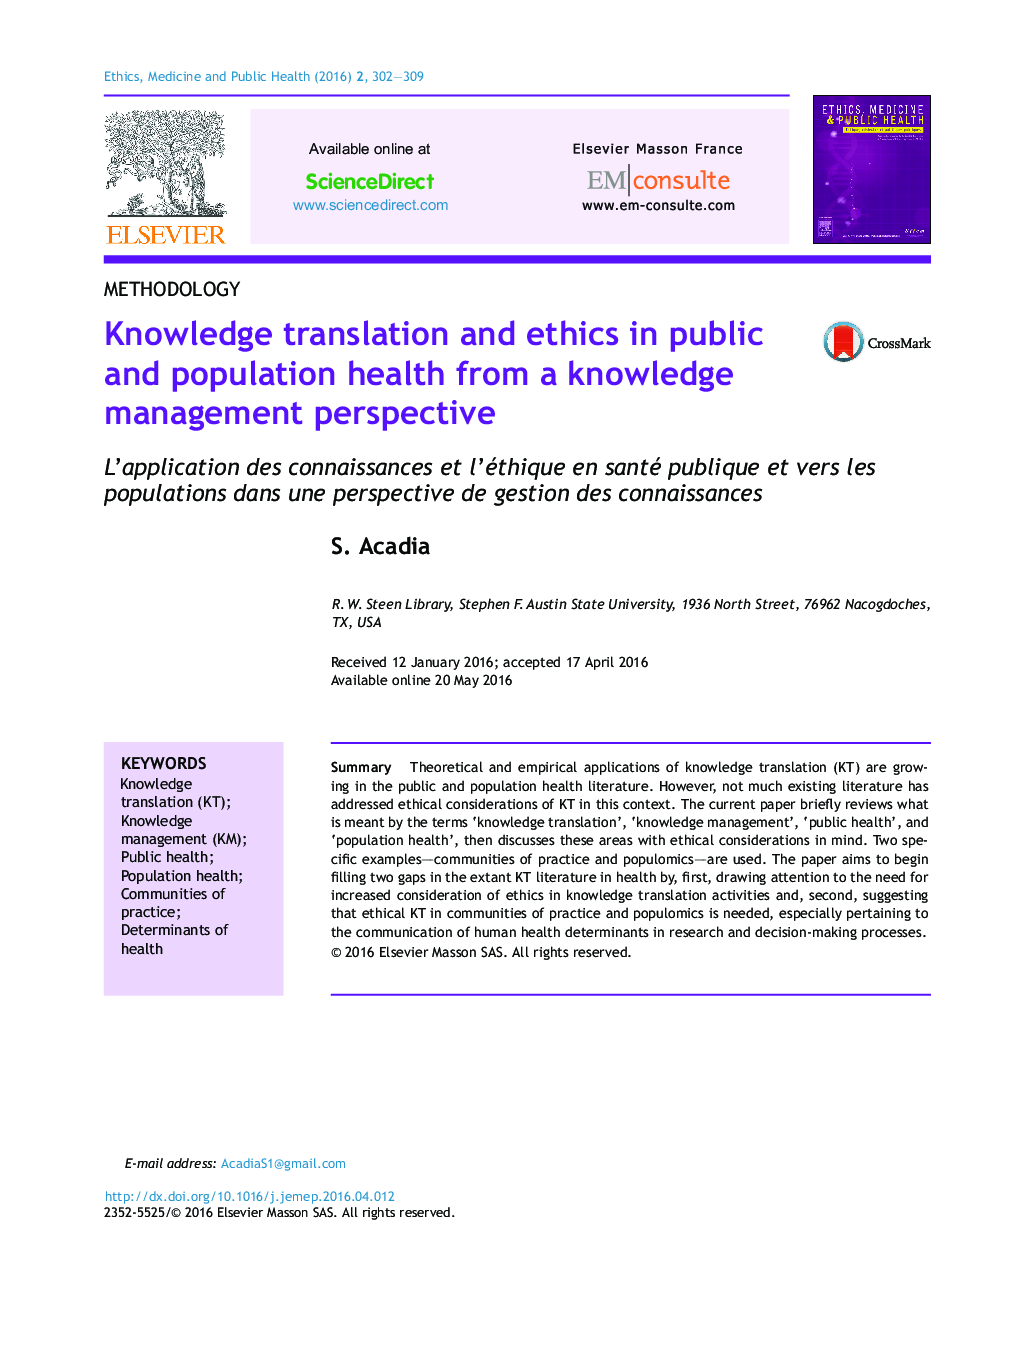 Knowledge translation and ethics in public and population health from a knowledge management perspective